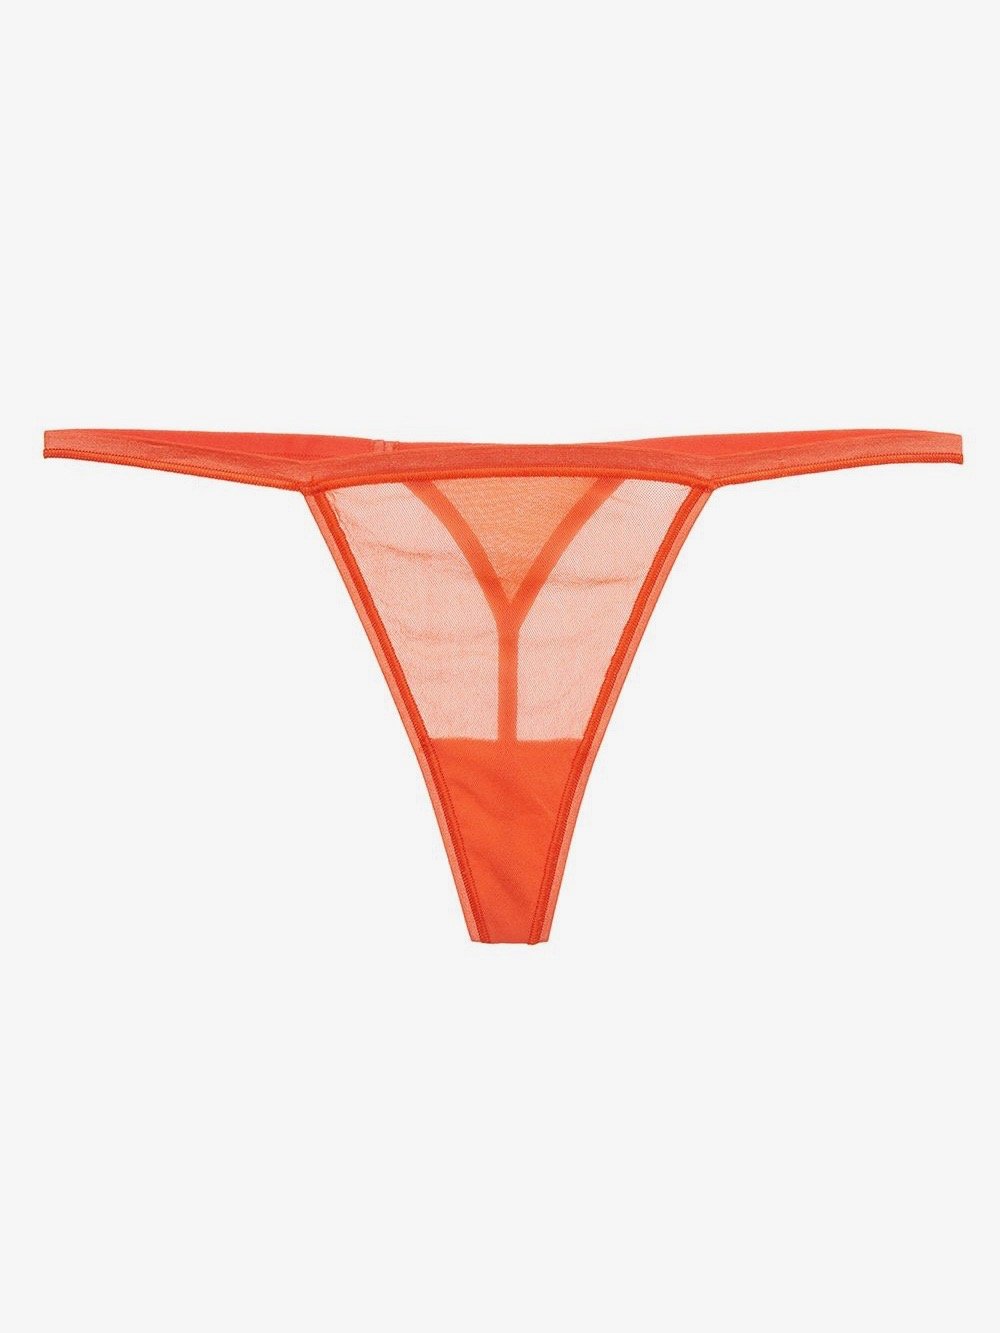 Cosabella G-STRINGS O/S (ONE SIZE) / HOT TAMALE Cosabella CONFIDENCE Sexy G Strings Panties